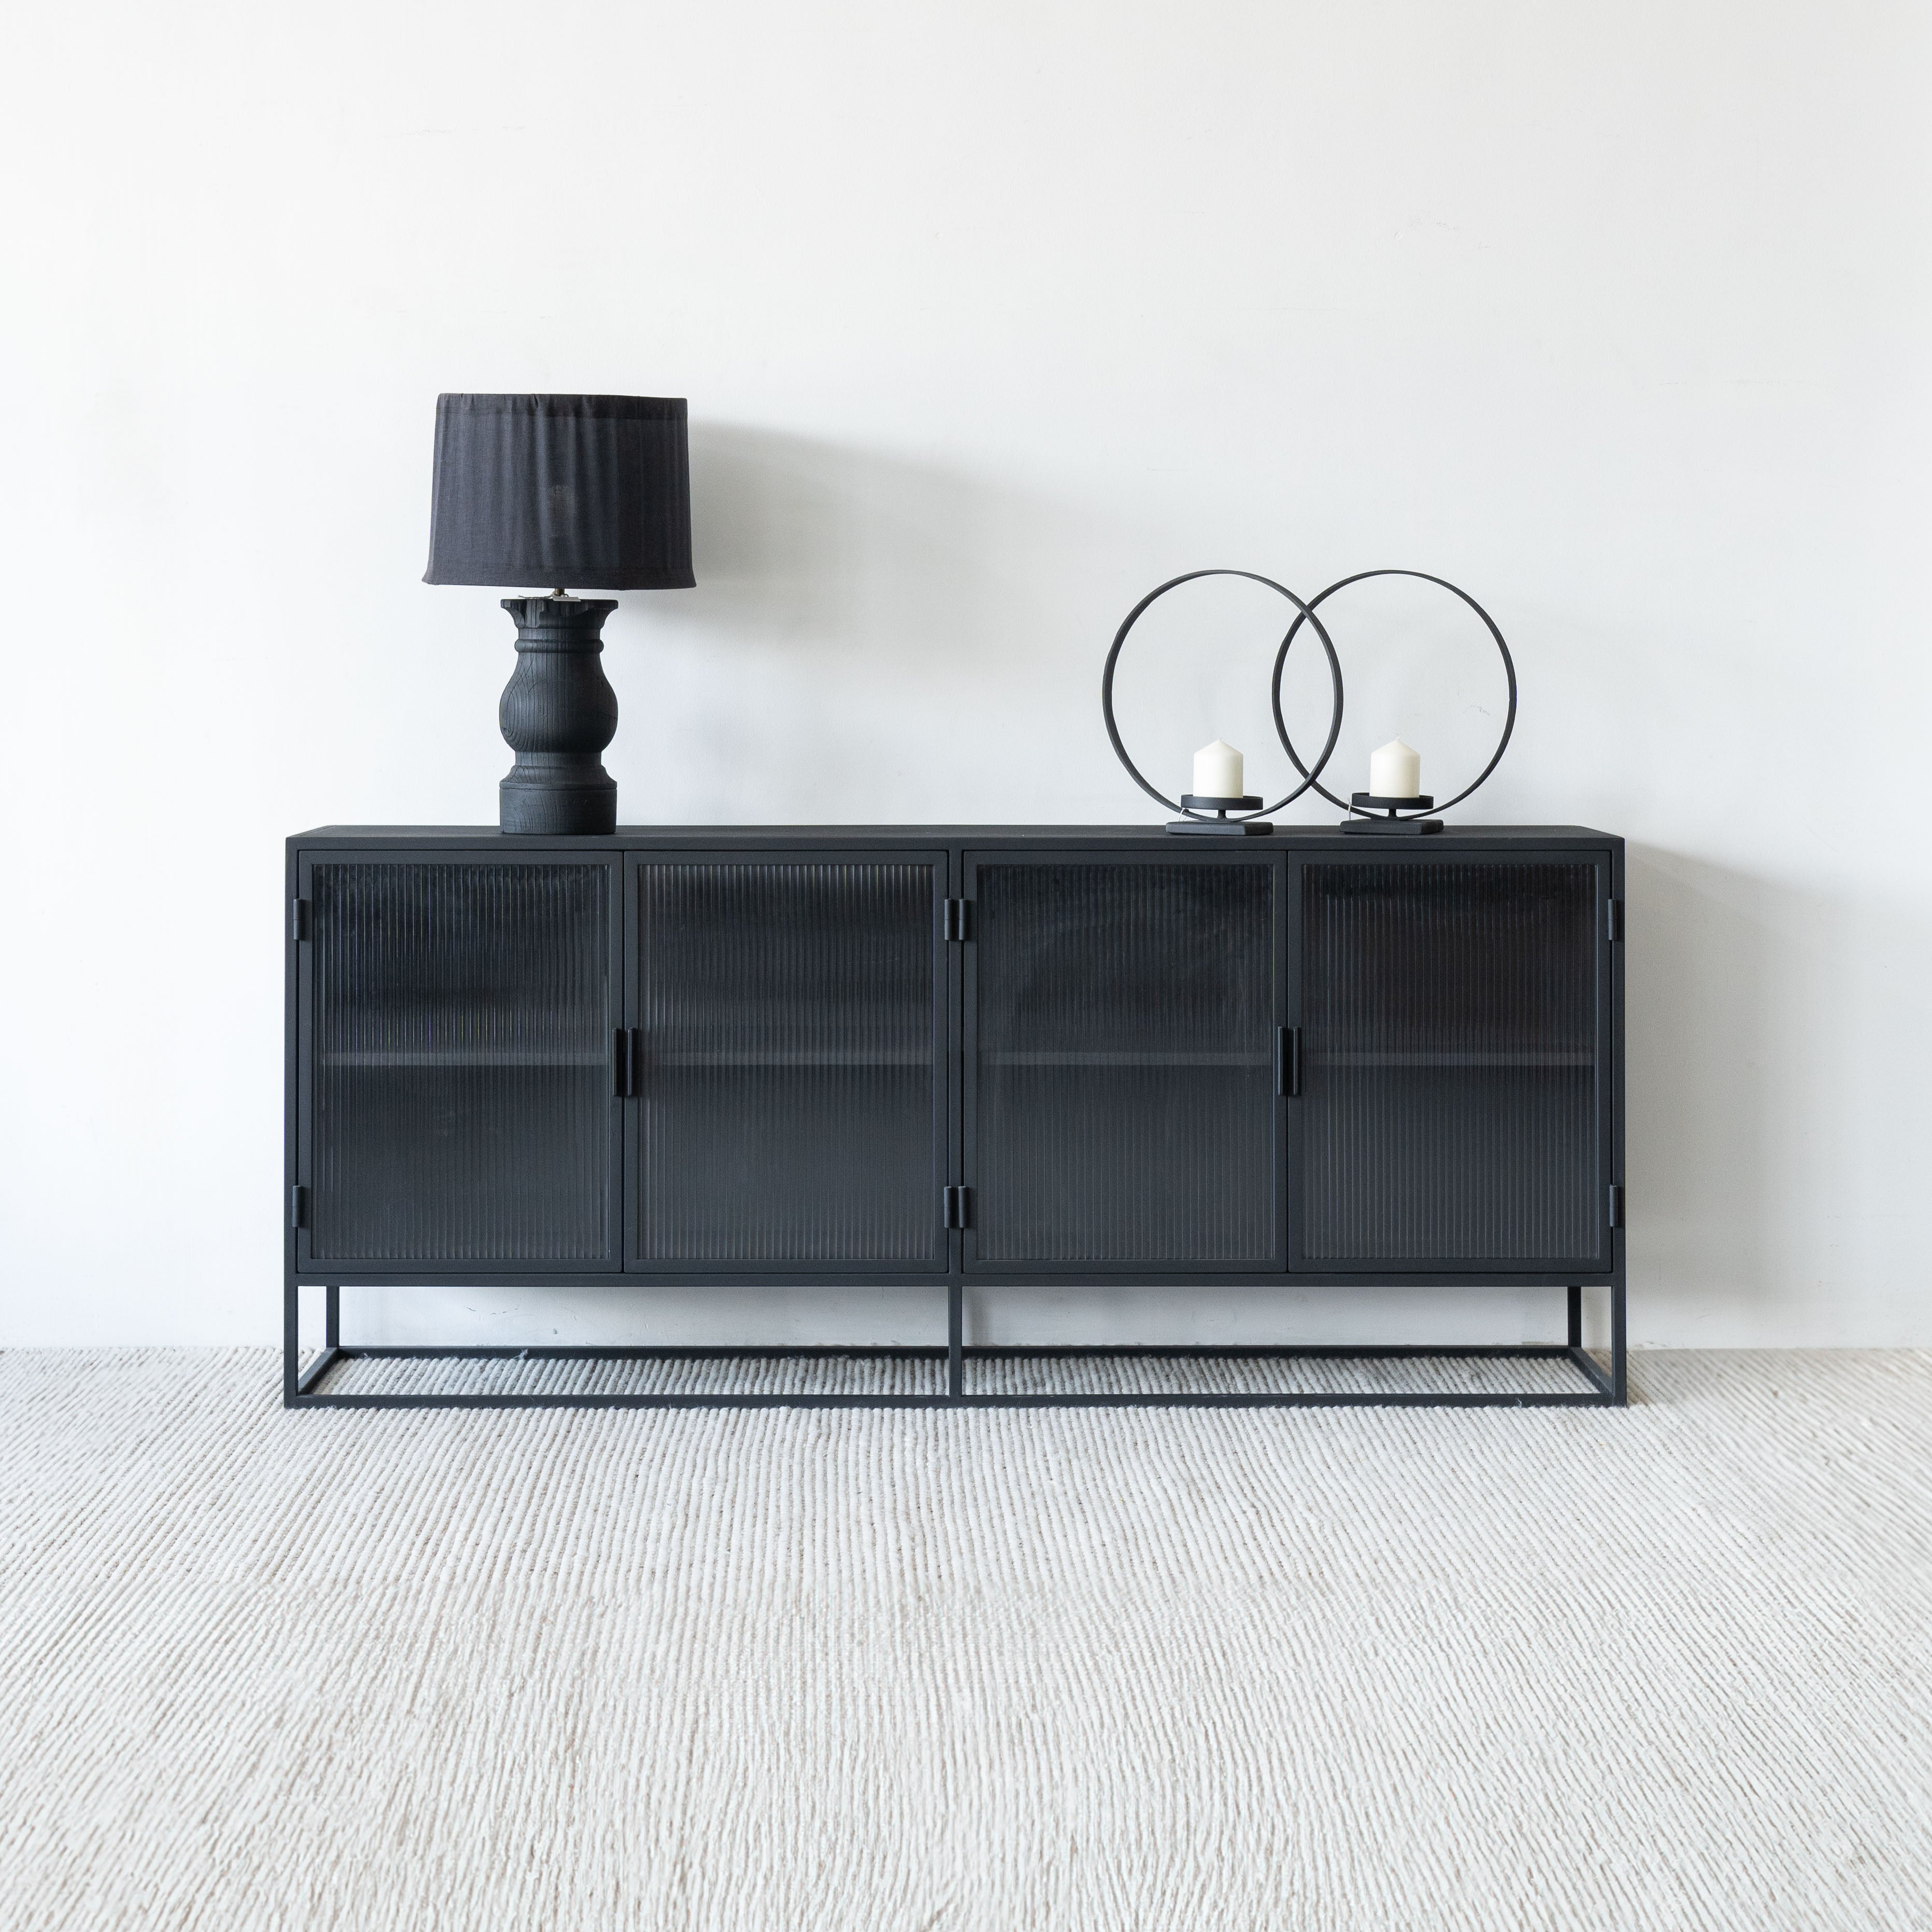 Monochrome Glass Sideboard - Wood and Steel Furnitures